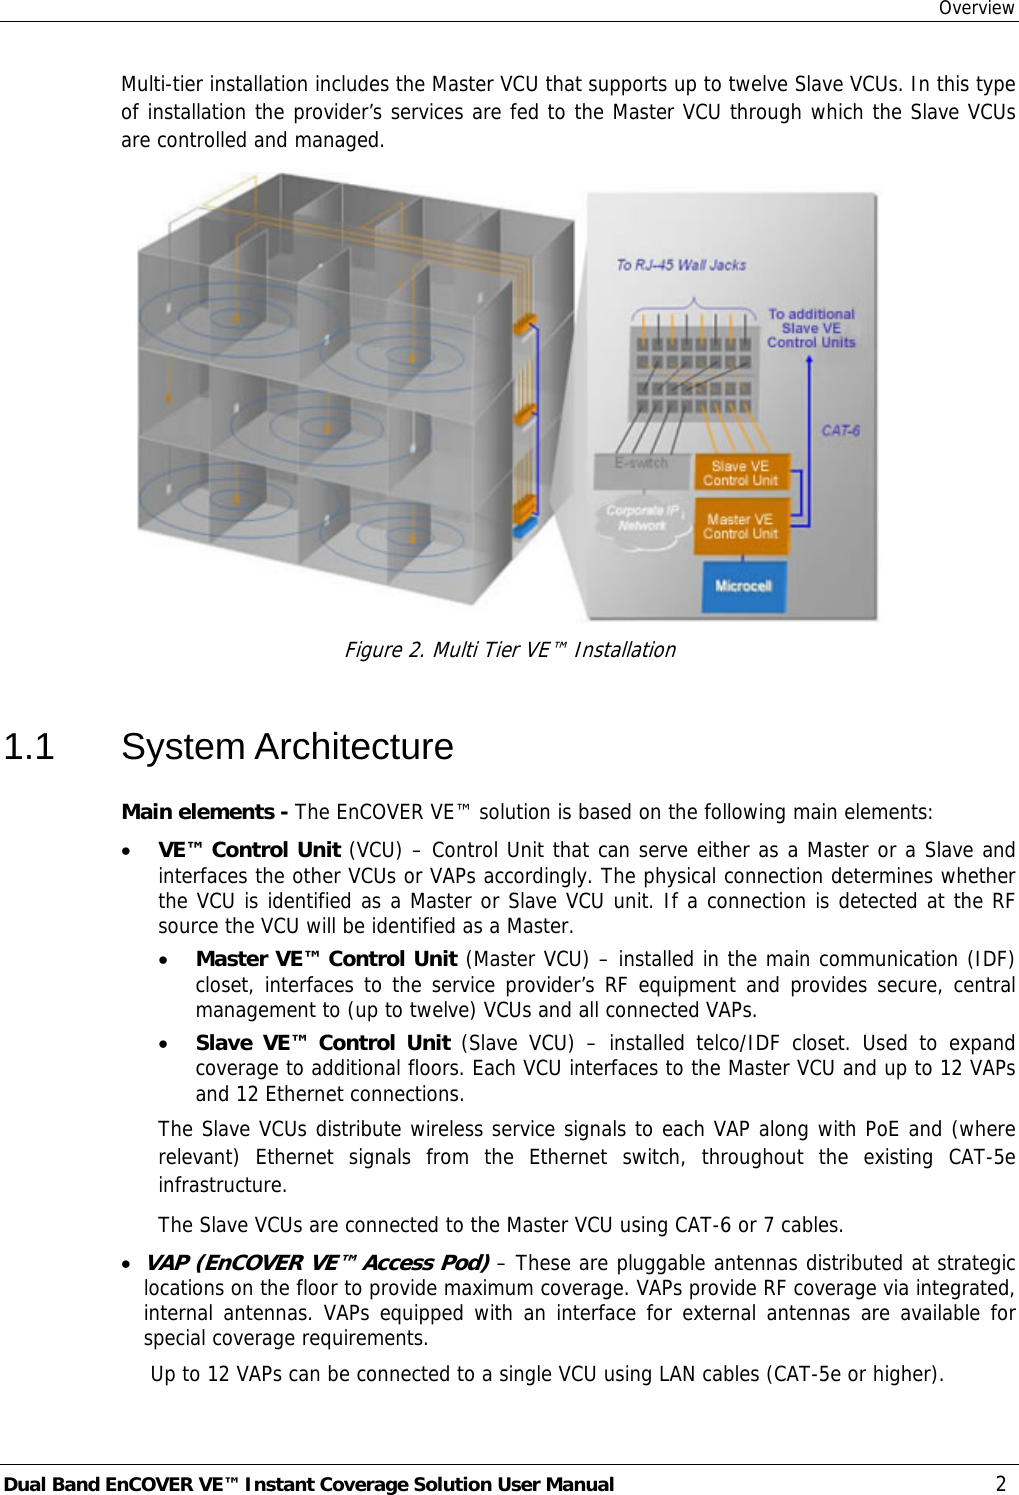 Overview Dual Band EnCOVER VE™ Instant Coverage Solution User Manual  2 Multi-tier installation includes the Master VCU that supports up to twelve Slave VCUs. In this type of installation the provider’s services are fed to the Master VCU through which the Slave VCUs are controlled and managed.   Figure 2. Multi Tier VE™ Installation 1.1 System Architecture Main elements - The EnCOVER VE™ solution is based on the following main elements:  • VE™ Control Unit (VCU) – Control Unit that can serve either as a Master or a Slave and interfaces the other VCUs or VAPs accordingly. The physical connection determines whether the VCU is identified as a Master or Slave VCU unit. If a connection is detected at the RF source the VCU will be identified as a Master. • Master VE™ Control Unit (Master VCU) – installed in the main communication (IDF) closet, interfaces to the service provider’s RF equipment and provides secure, central management to (up to twelve) VCUs and all connected VAPs. • Slave VE™ Control Unit (Slave VCU) – installed telco/IDF closet. Used to expand coverage to additional floors. Each VCU interfaces to the Master VCU and up to 12 VAPs and 12 Ethernet connections.  The Slave VCUs distribute wireless service signals to each VAP along with PoE and (where relevant) Ethernet signals from the Ethernet switch, throughout the existing CAT-5e infrastructure.  The Slave VCUs are connected to the Master VCU using CAT-6 or 7 cables. • VAP (EnCOVER VE™ Access Pod) – These are pluggable antennas distributed at strategic locations on the floor to provide maximum coverage. VAPs provide RF coverage via integrated, internal antennas. VAPs equipped with an interface for external antennas are available for special coverage requirements.  Up to 12 VAPs can be connected to a single VCU using LAN cables (CAT-5e or higher). 